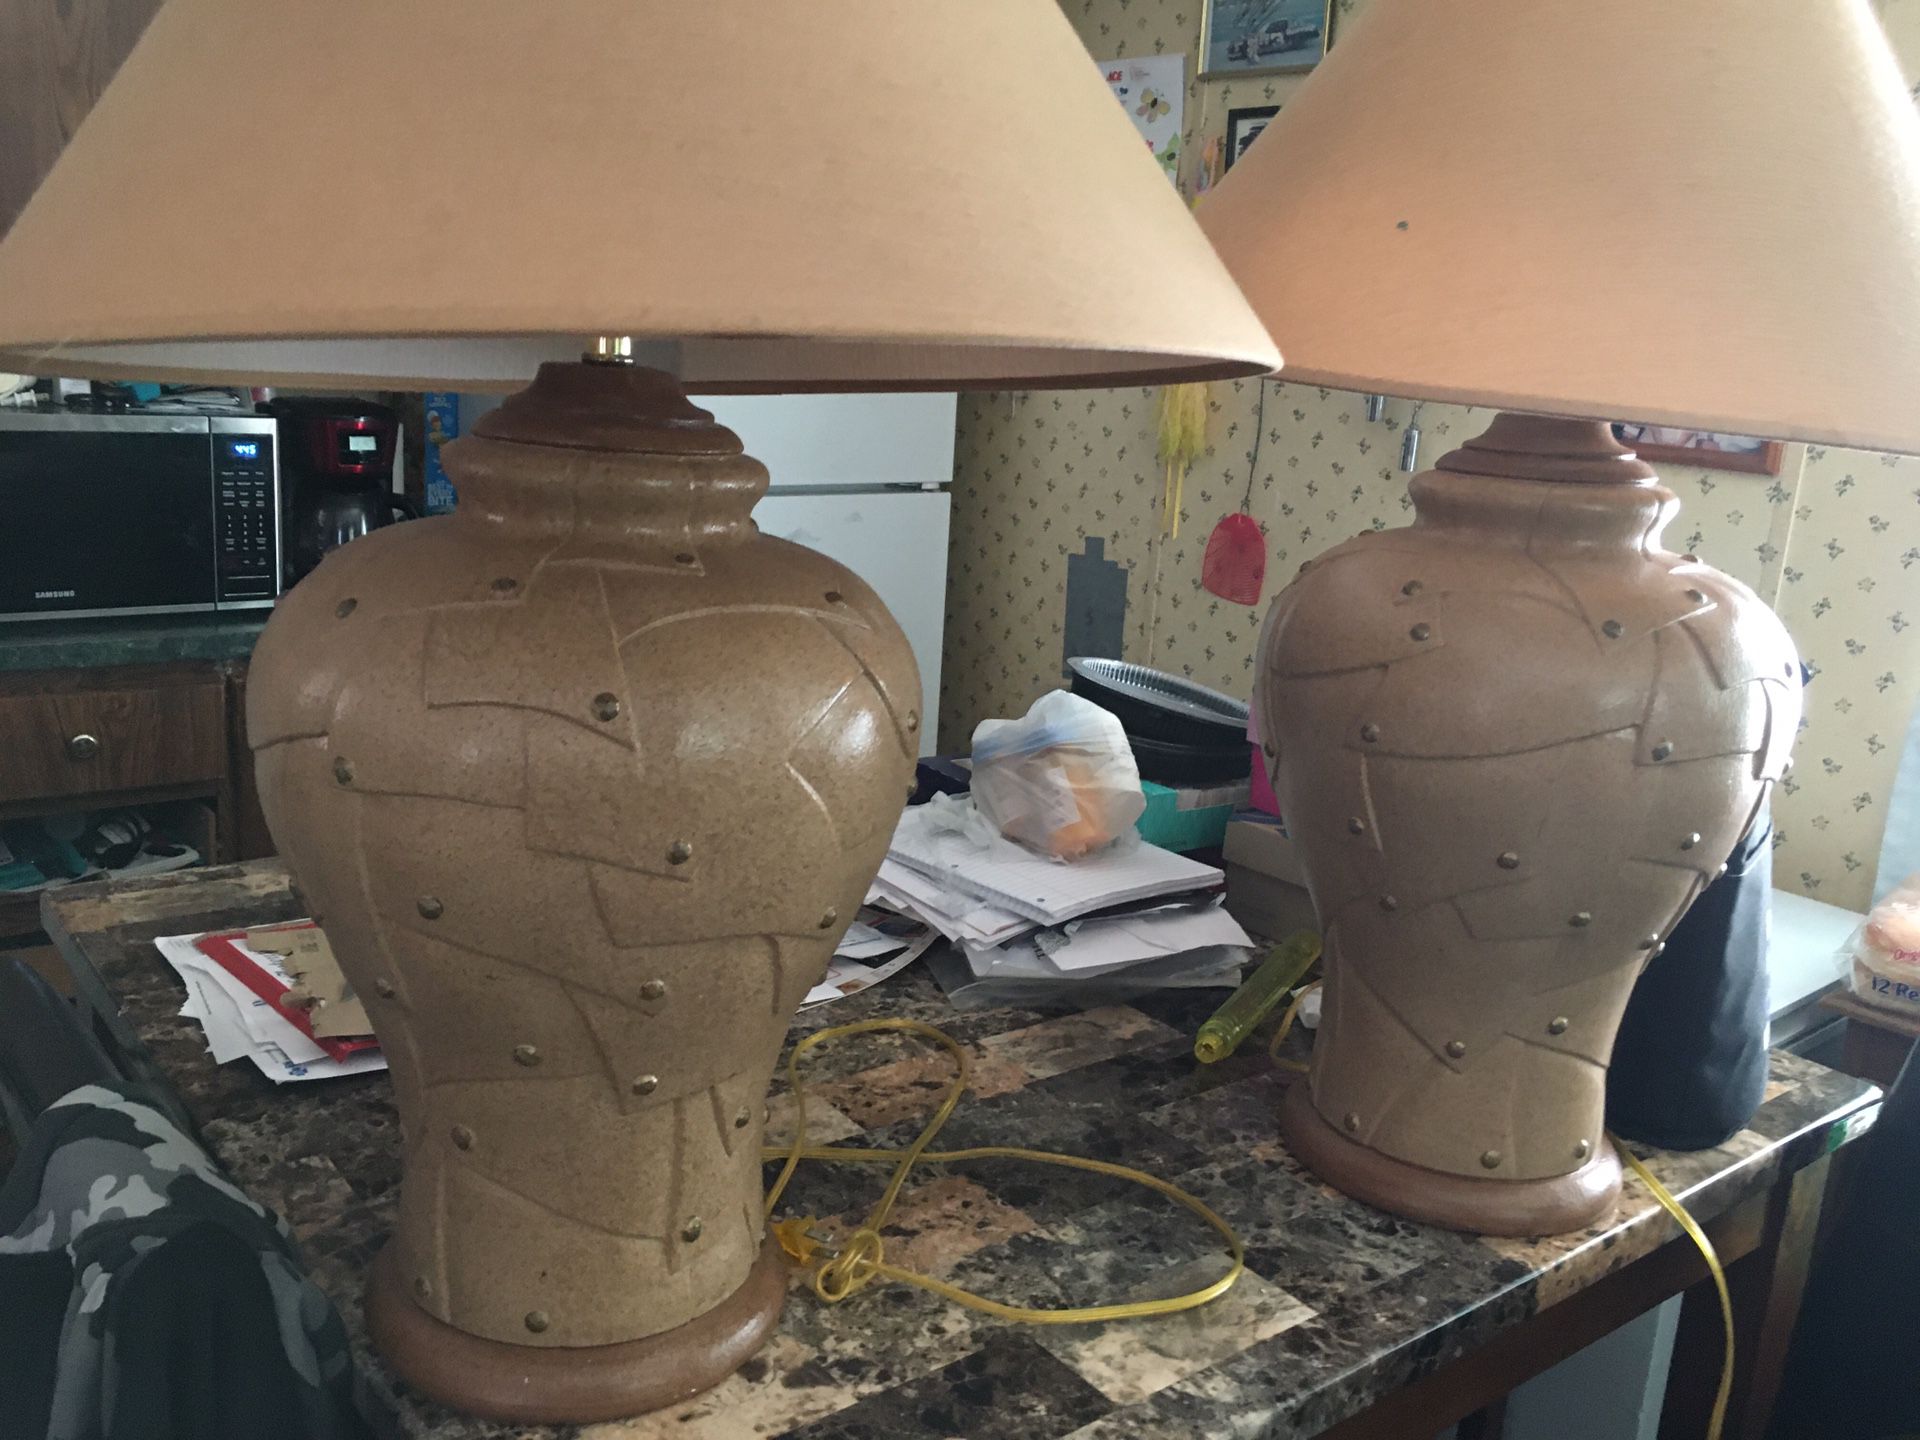 Heavy duty lamps color brown and beige